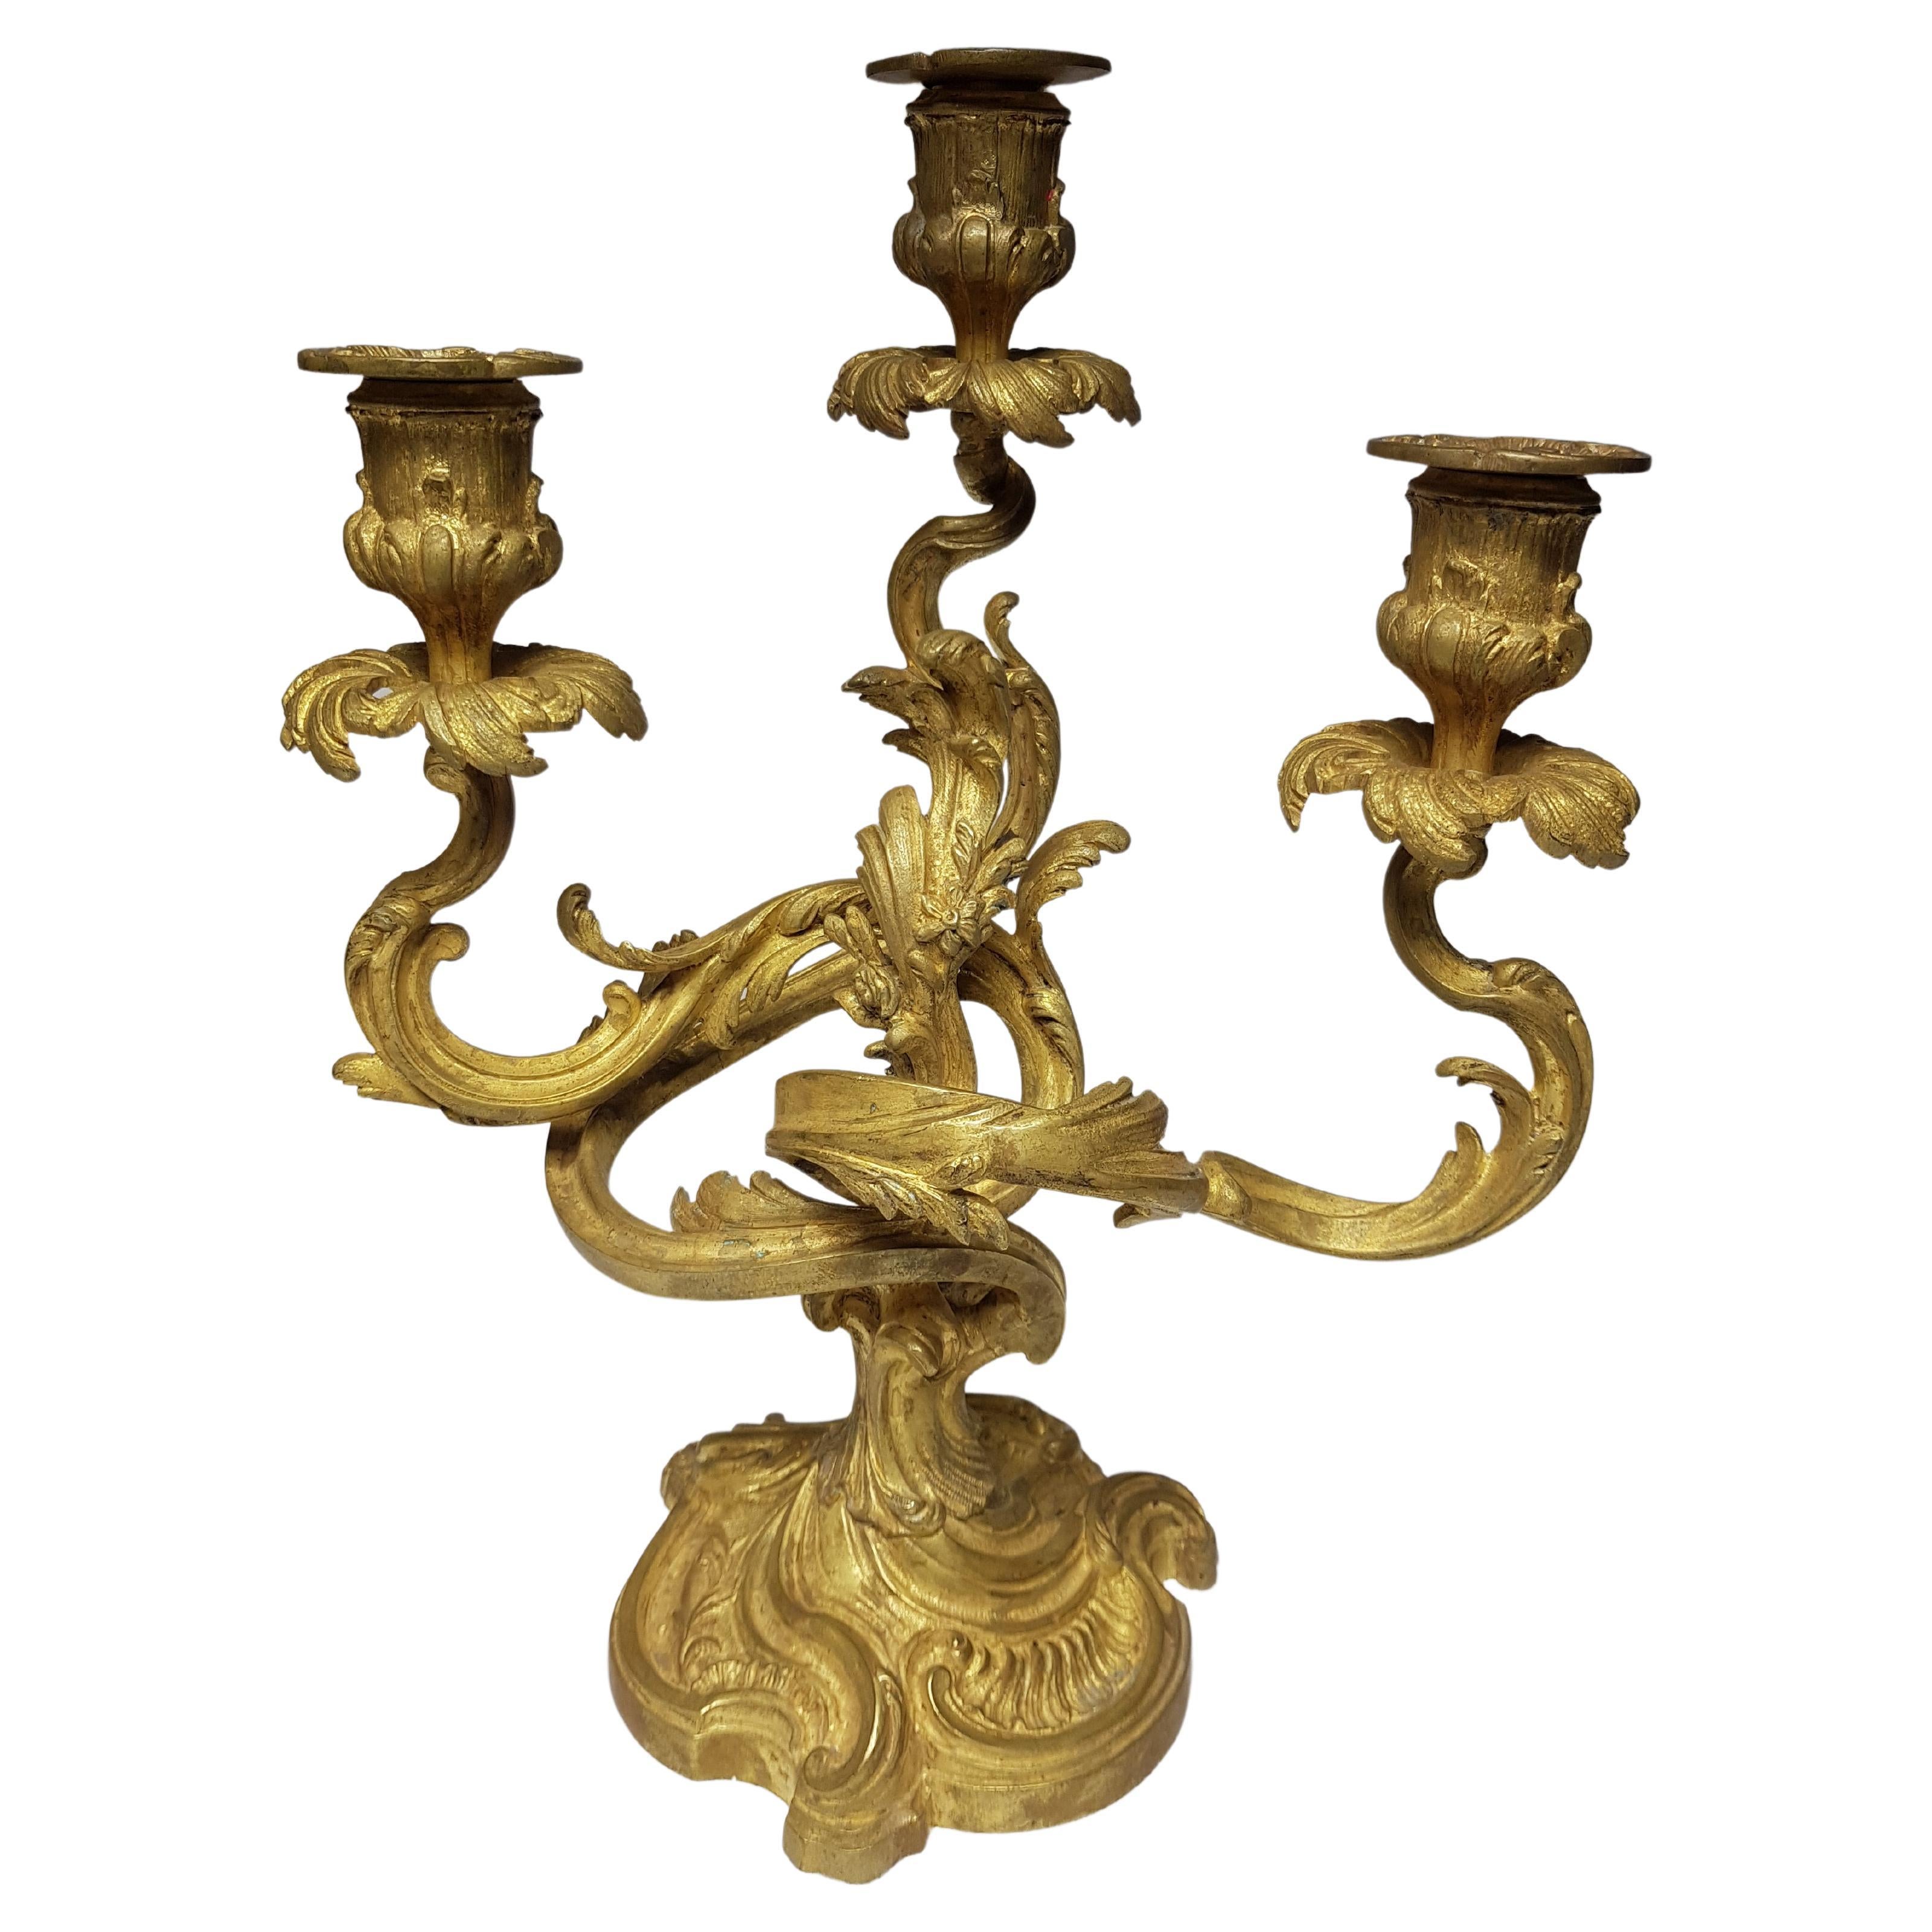 Majestic Brass Candlestick Pair, circa 1870 For Sale 5